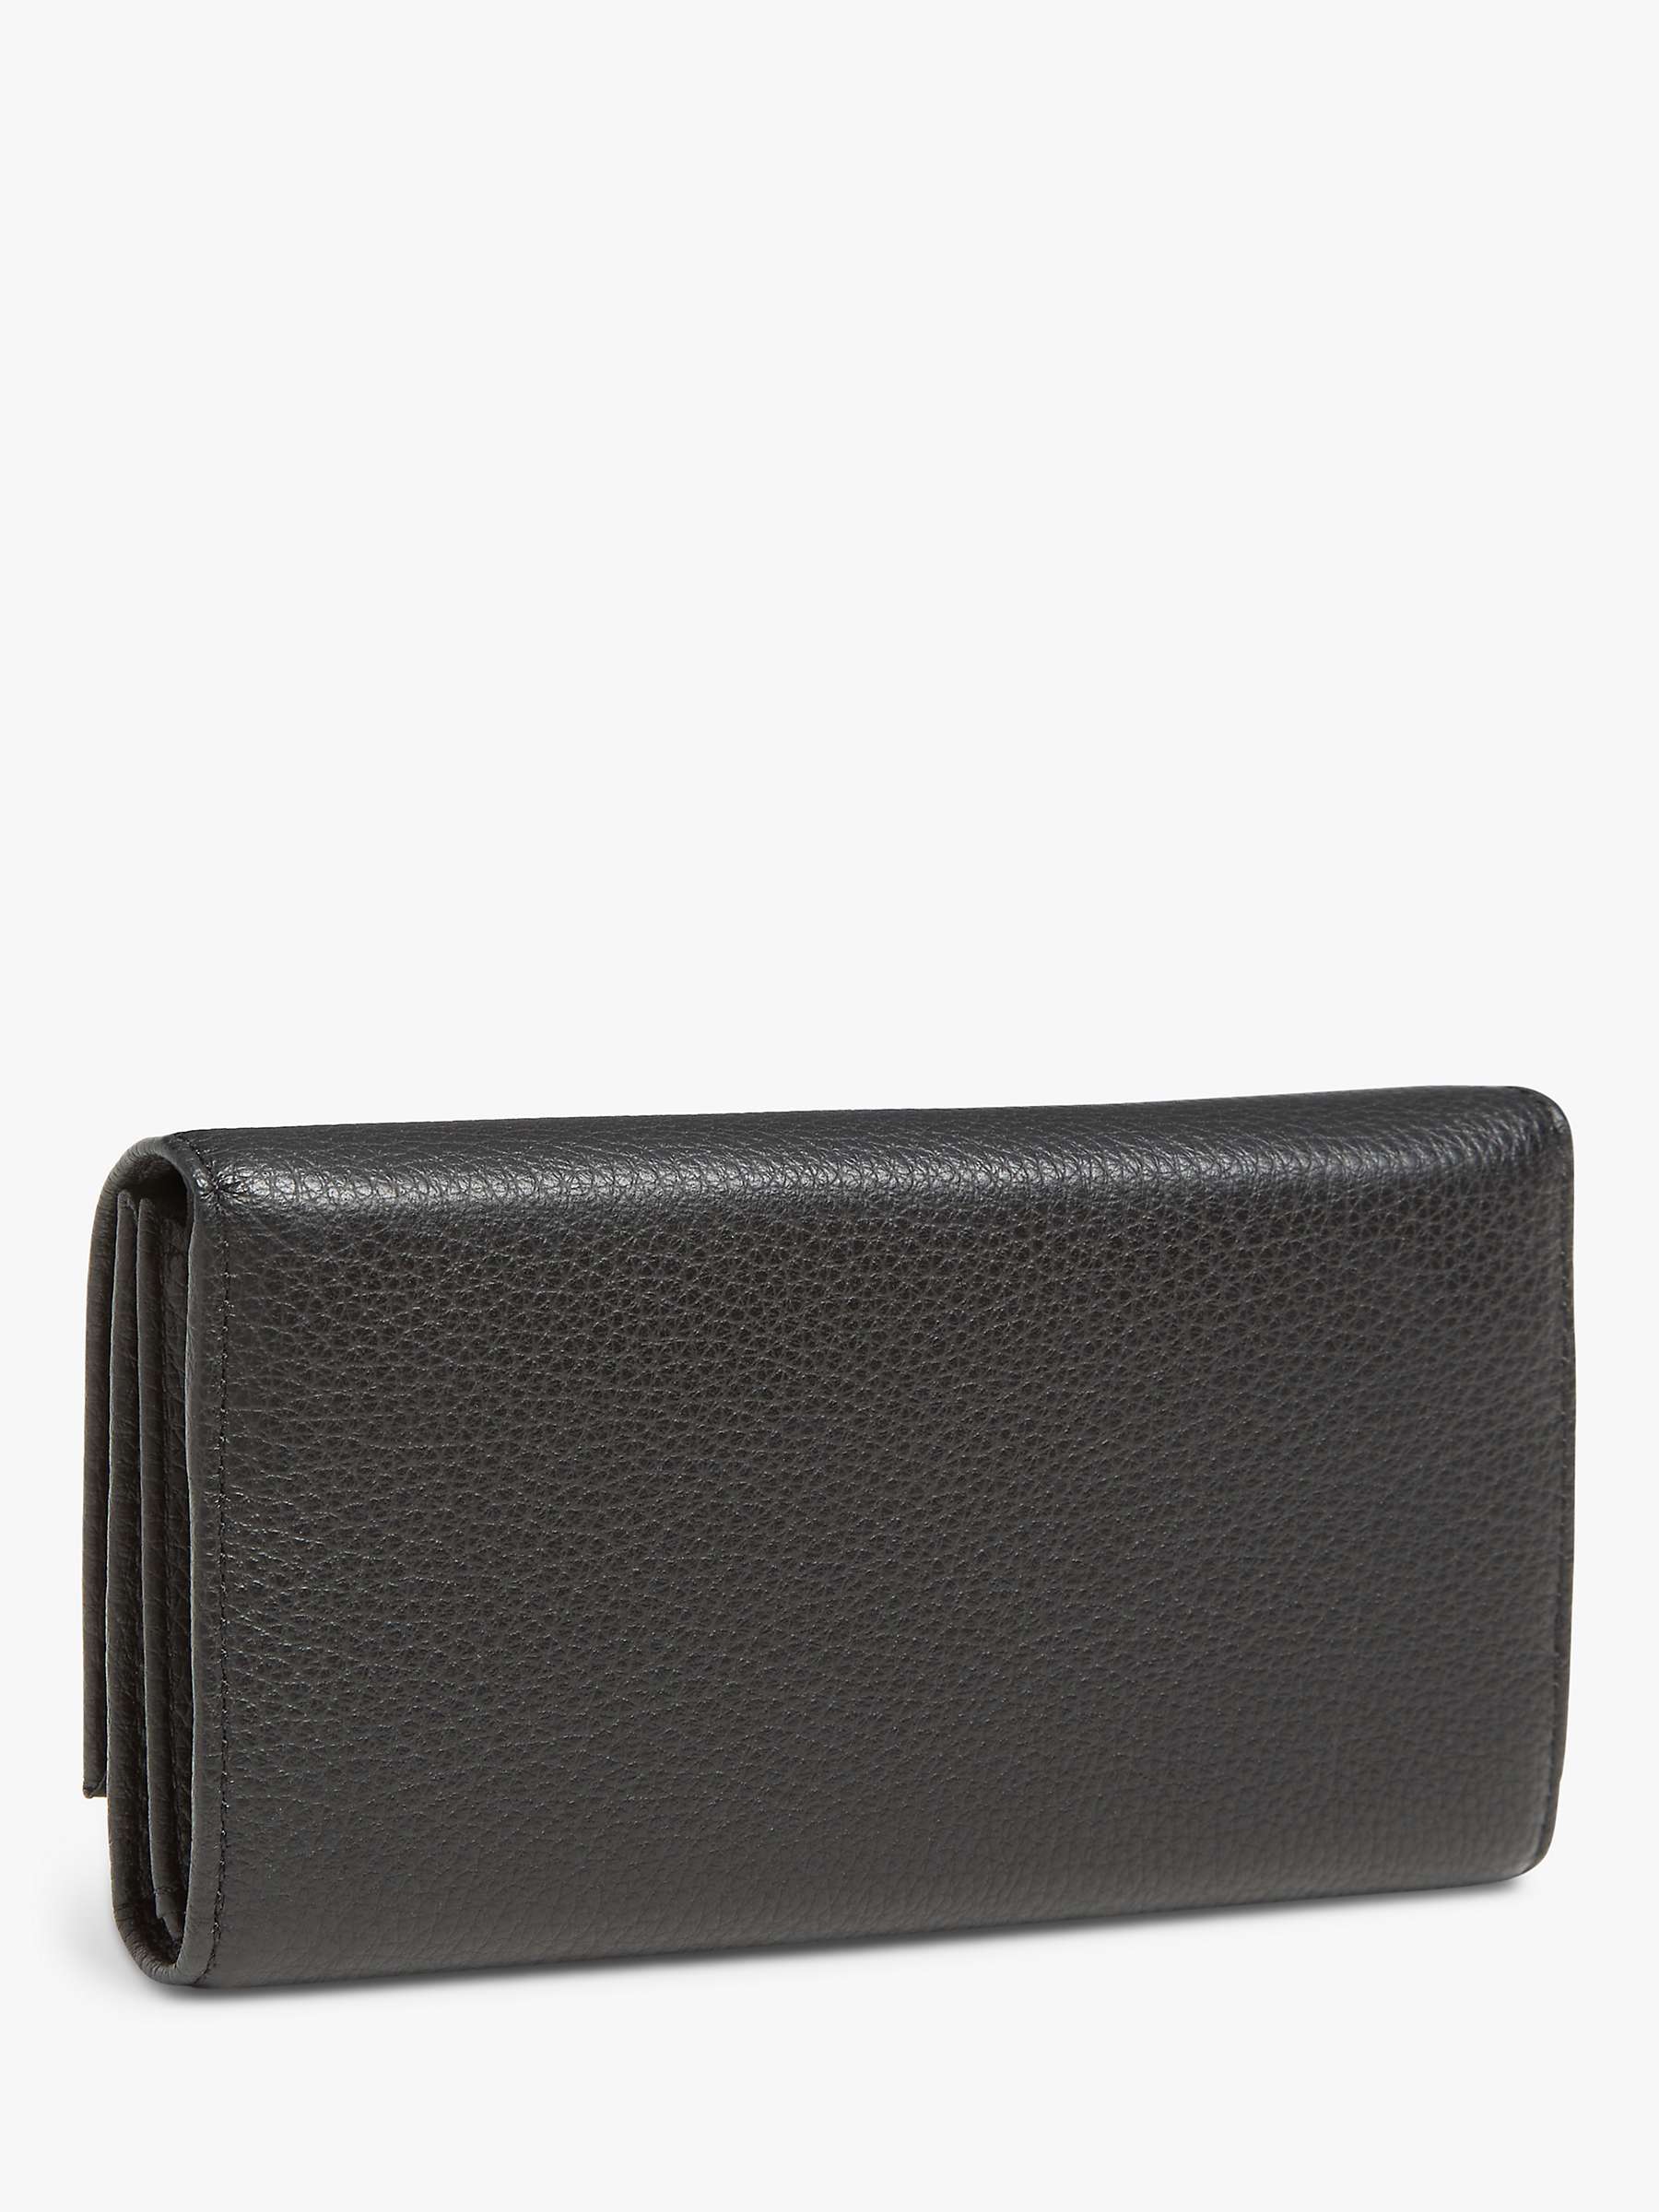 Buy Coccinelle Liya Large Leather Purse Online at johnlewis.com